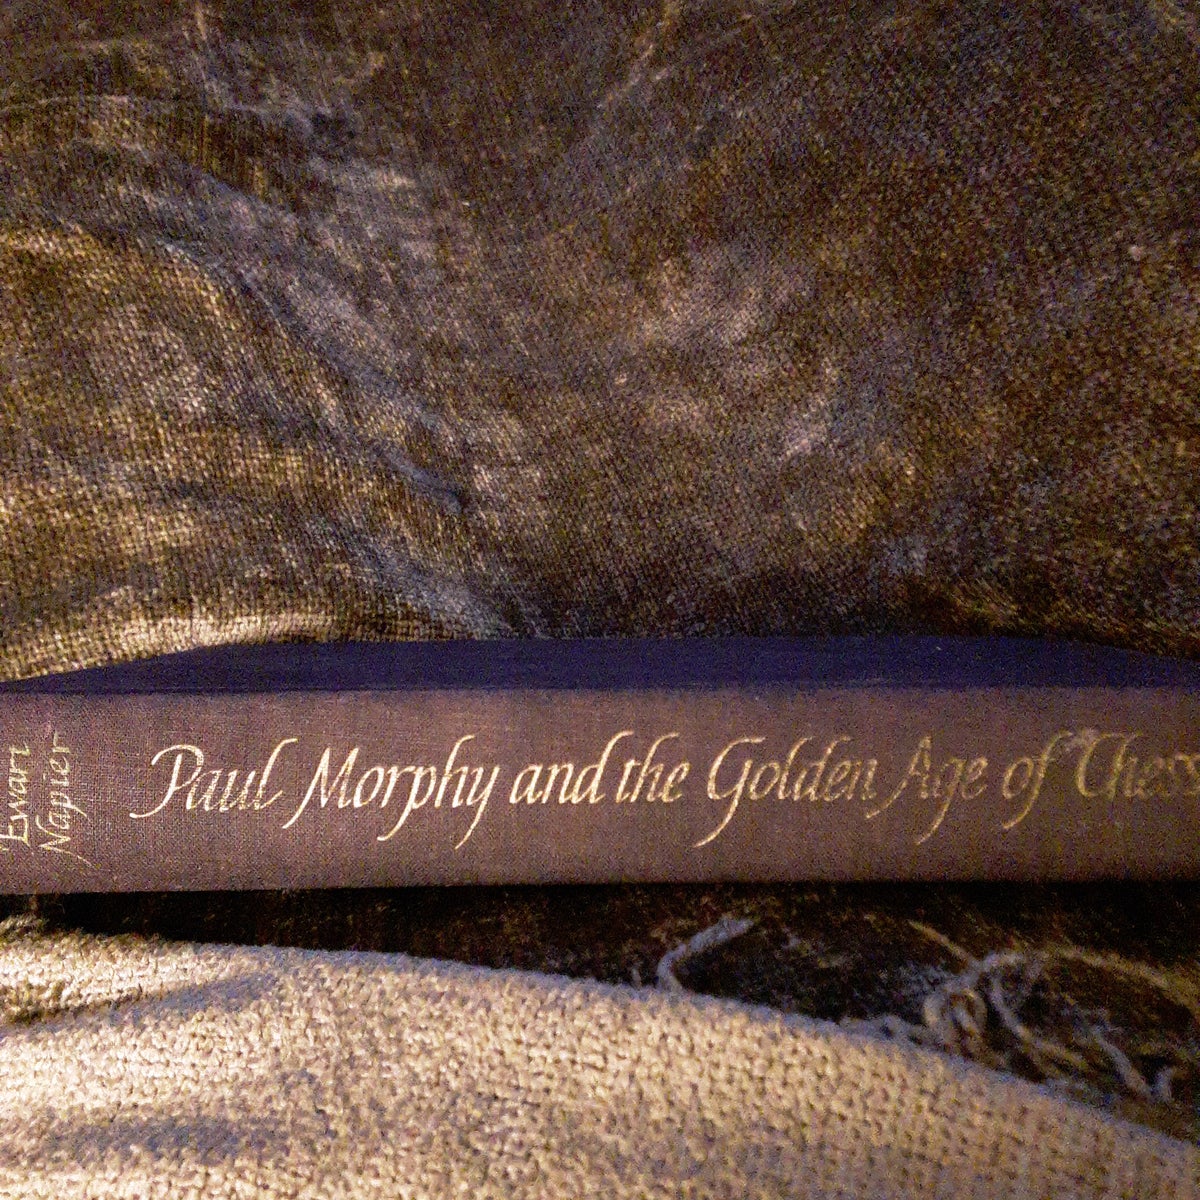 Paul Morphy and the Golden Age of by Napier, William Ewart